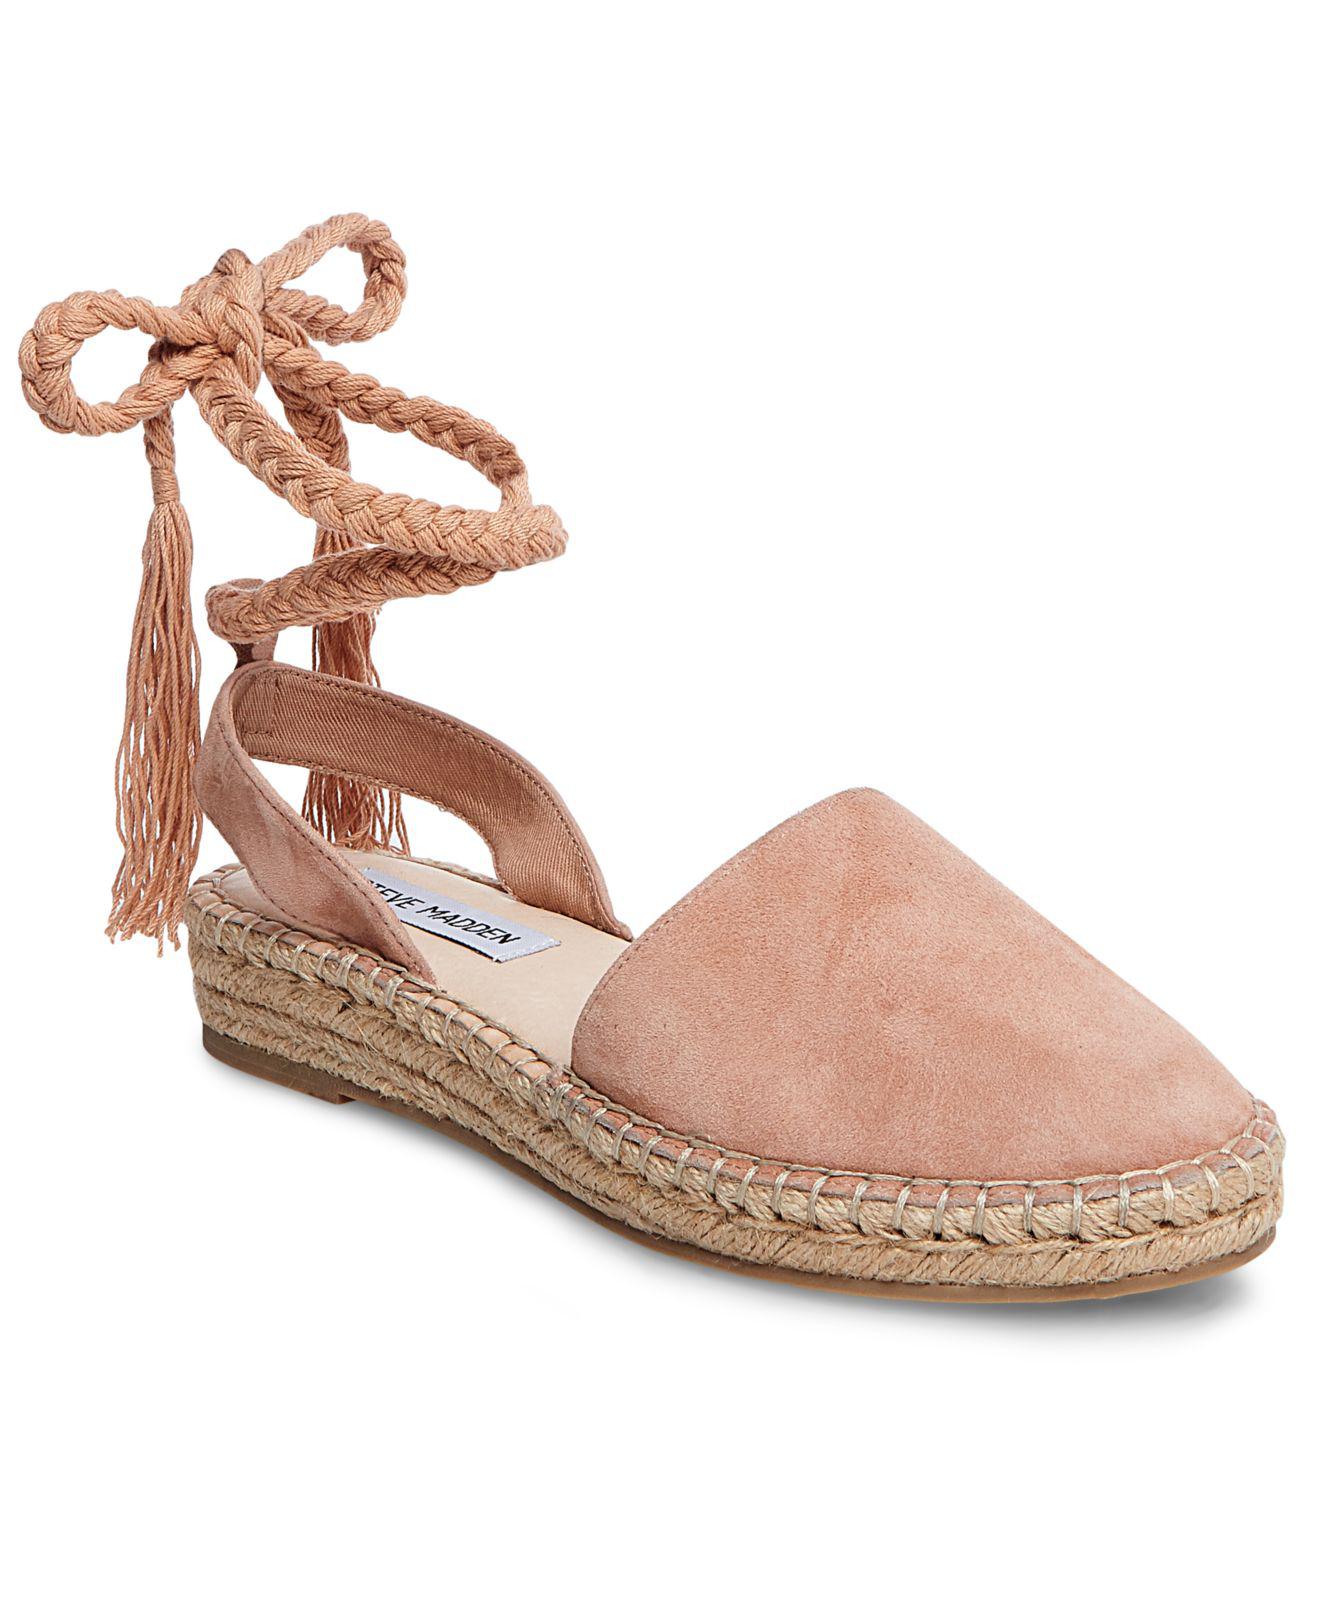 Steve Madden Mesa Espadrille Lace-up Flats in Natural | Lyst